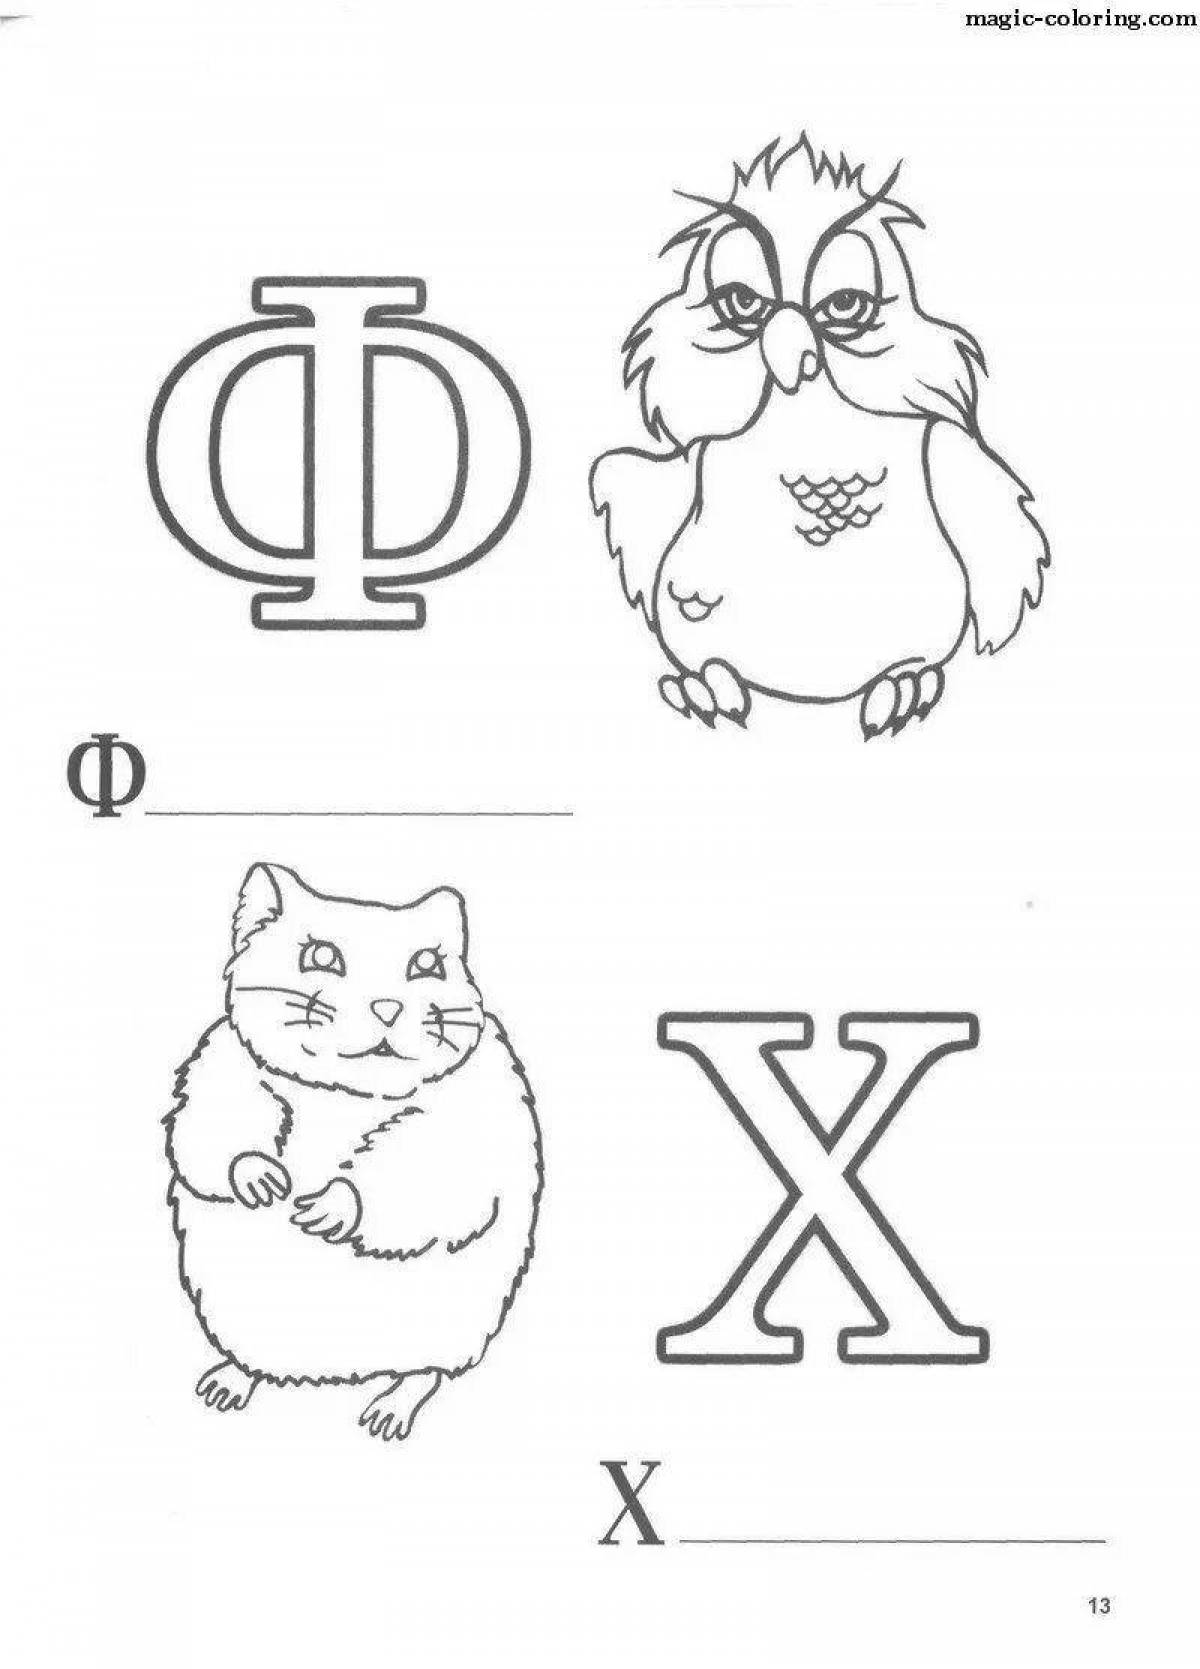 Creative alphabet coloring book for 3-4 year olds